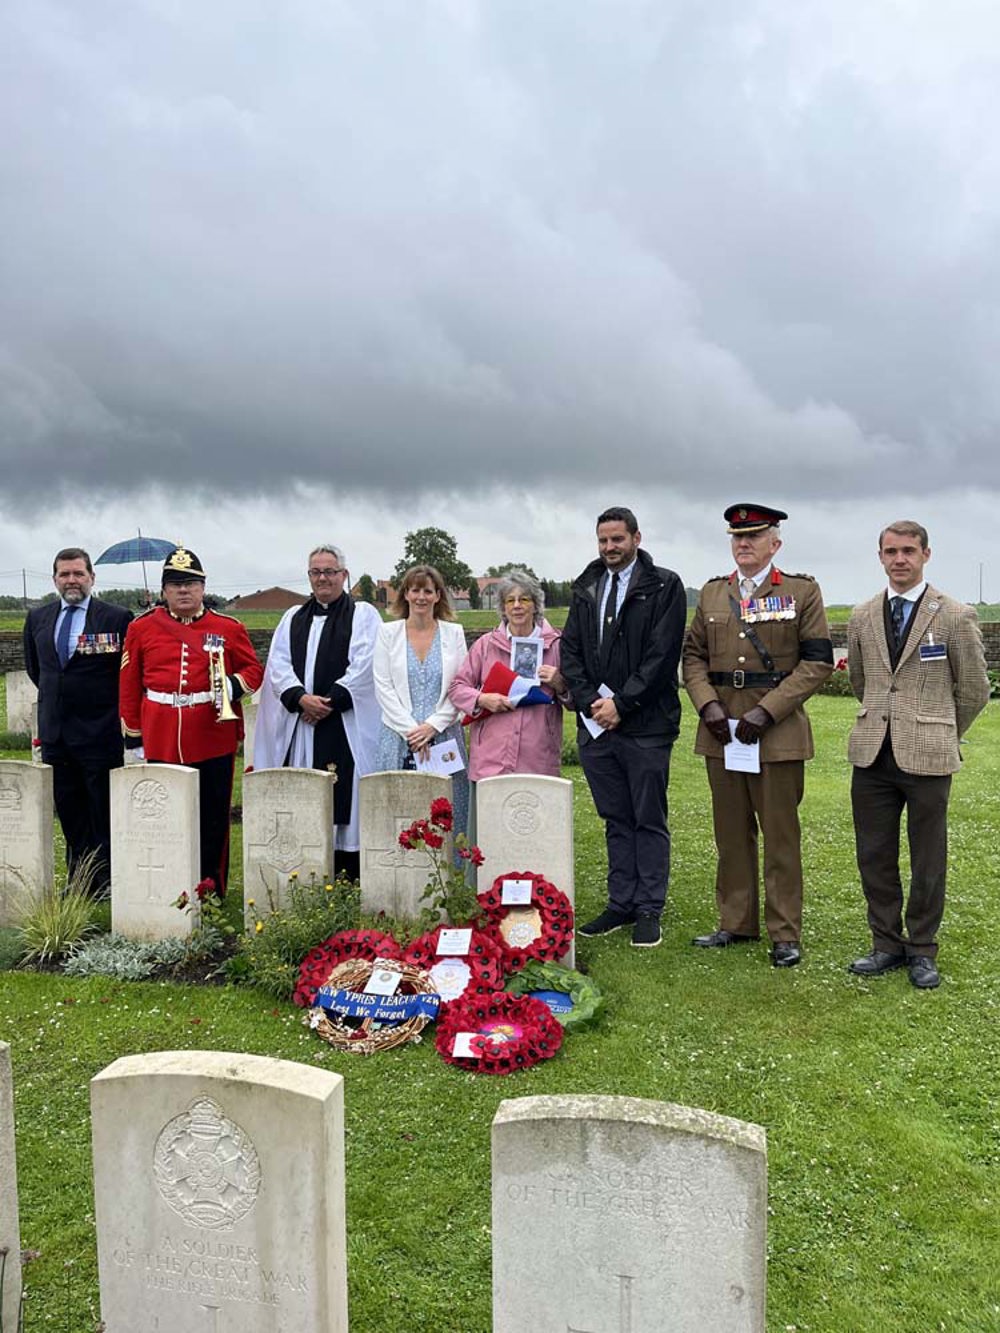 The family of Captain Nichols stand with the military party following the service of his reburial.